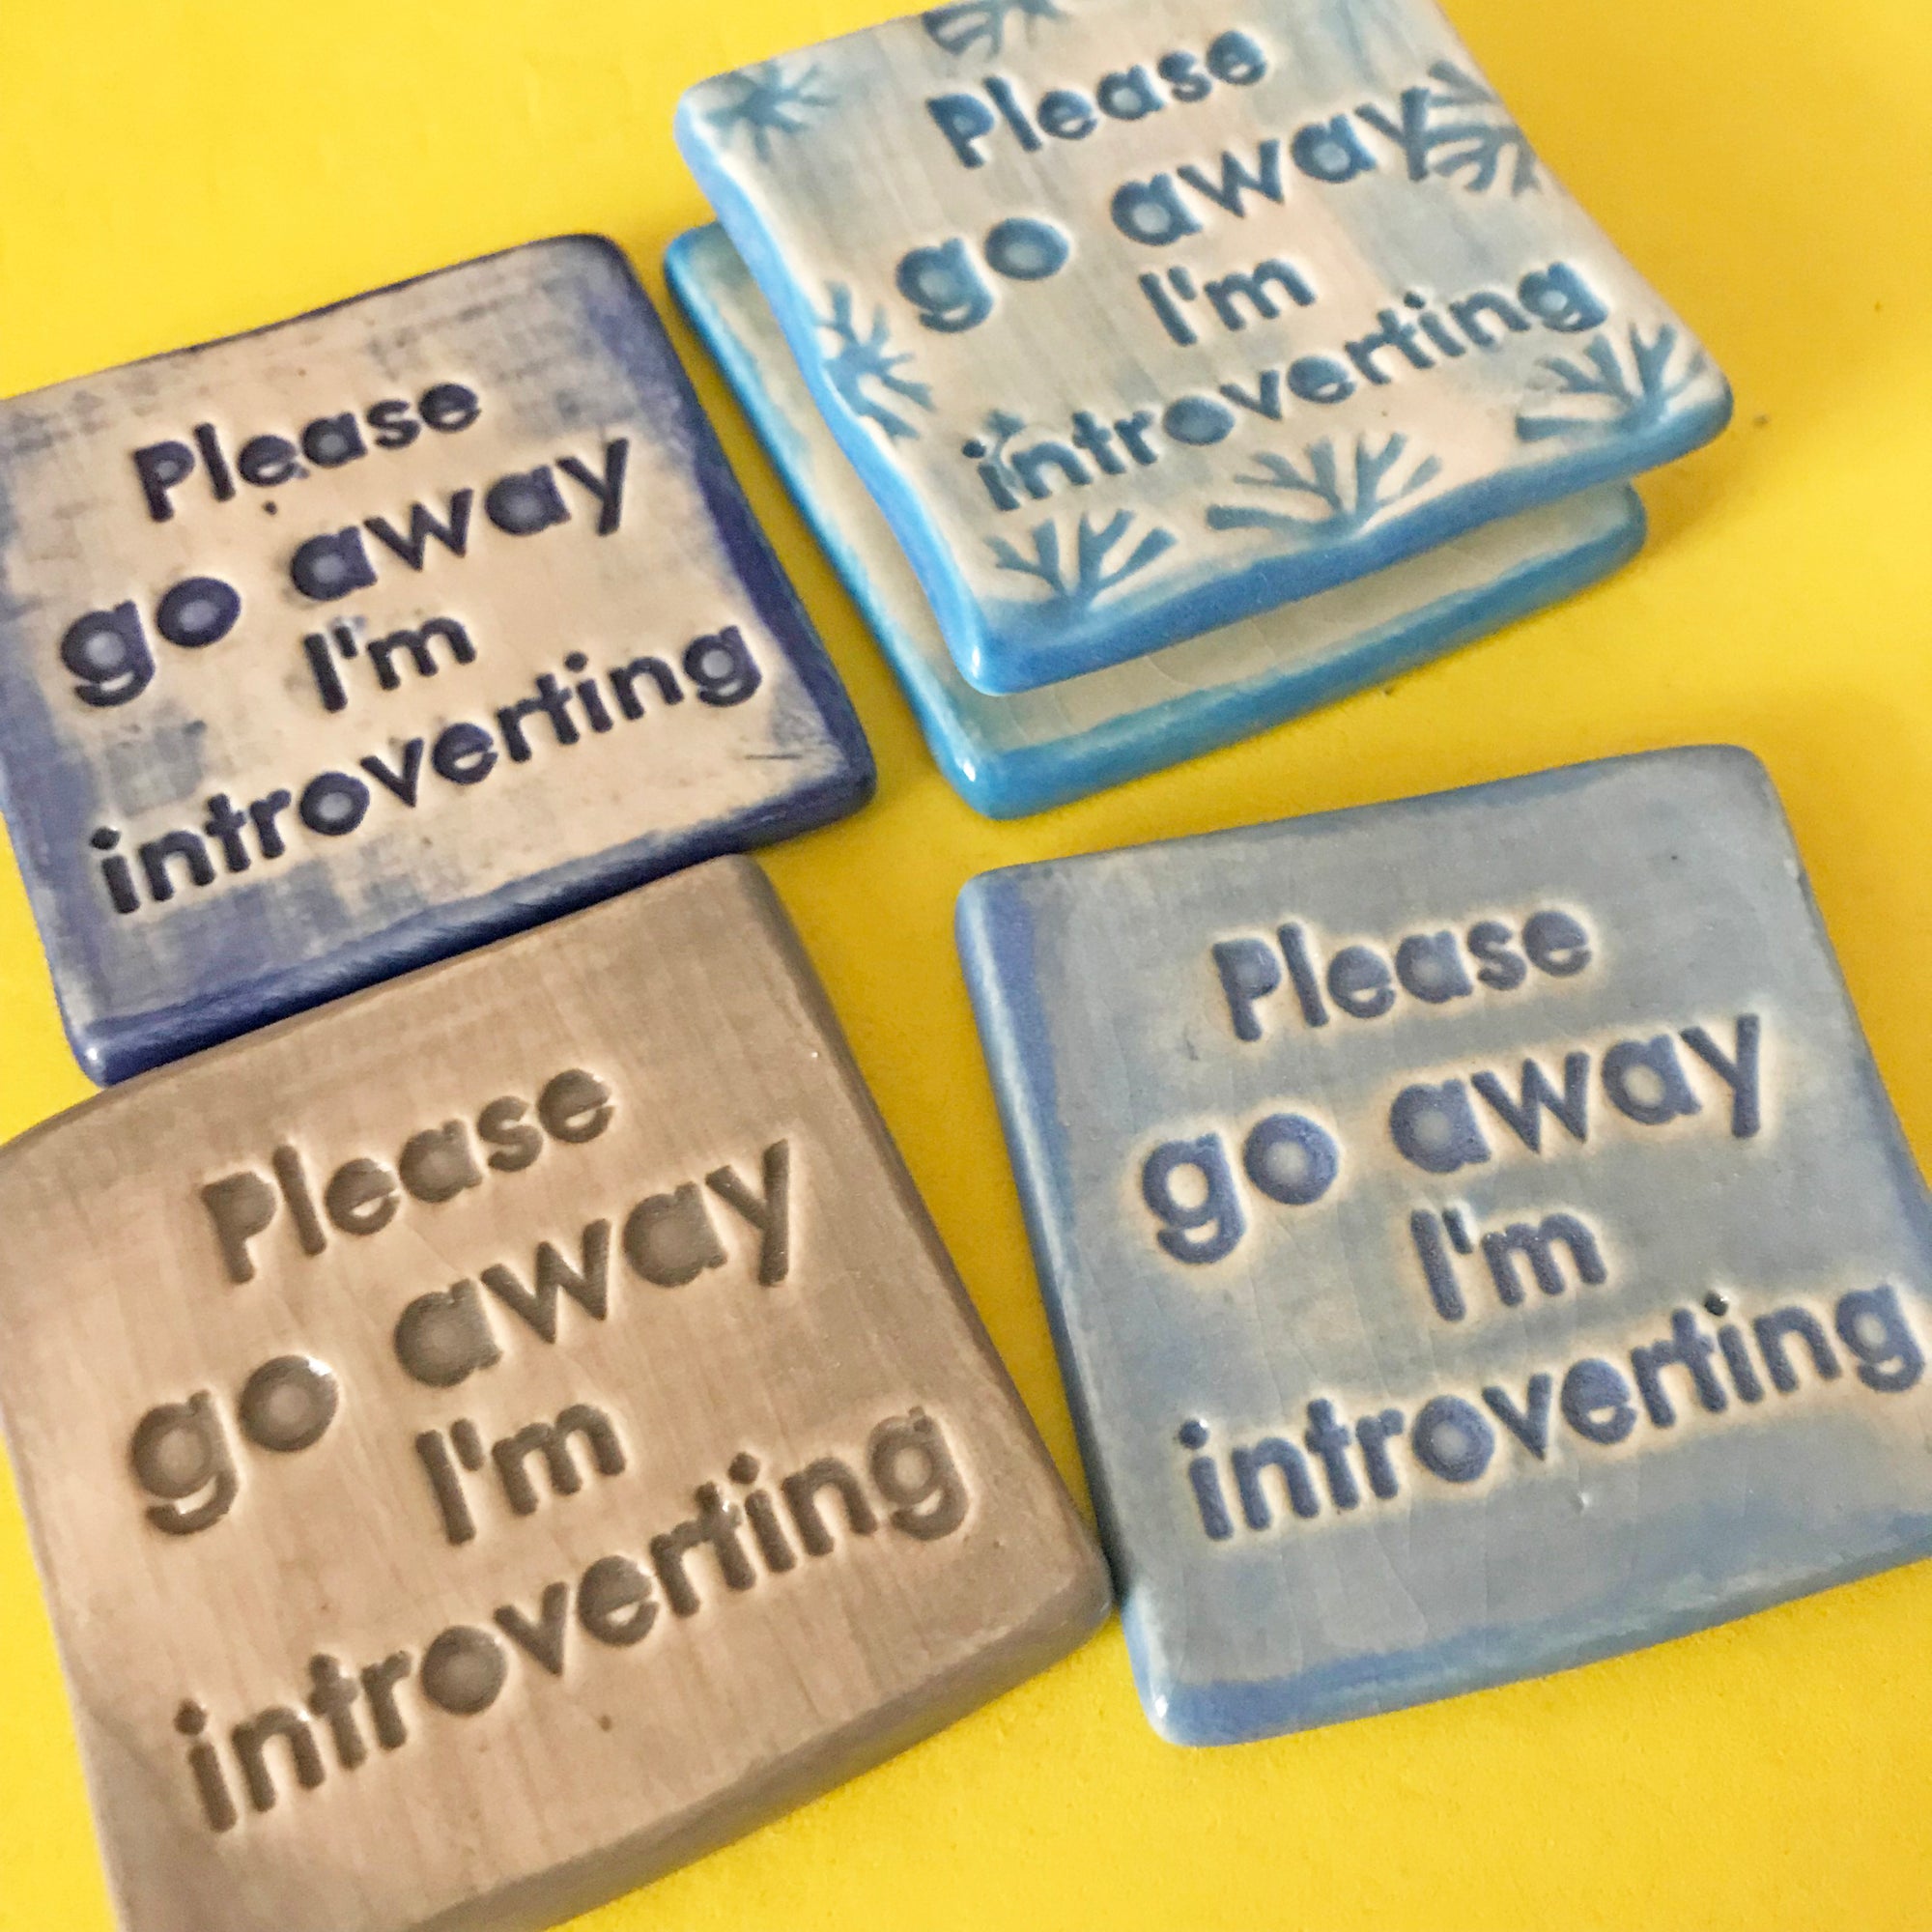 Attention introverts, this magnet is for you.  It says, "Please go away I'm introverting".